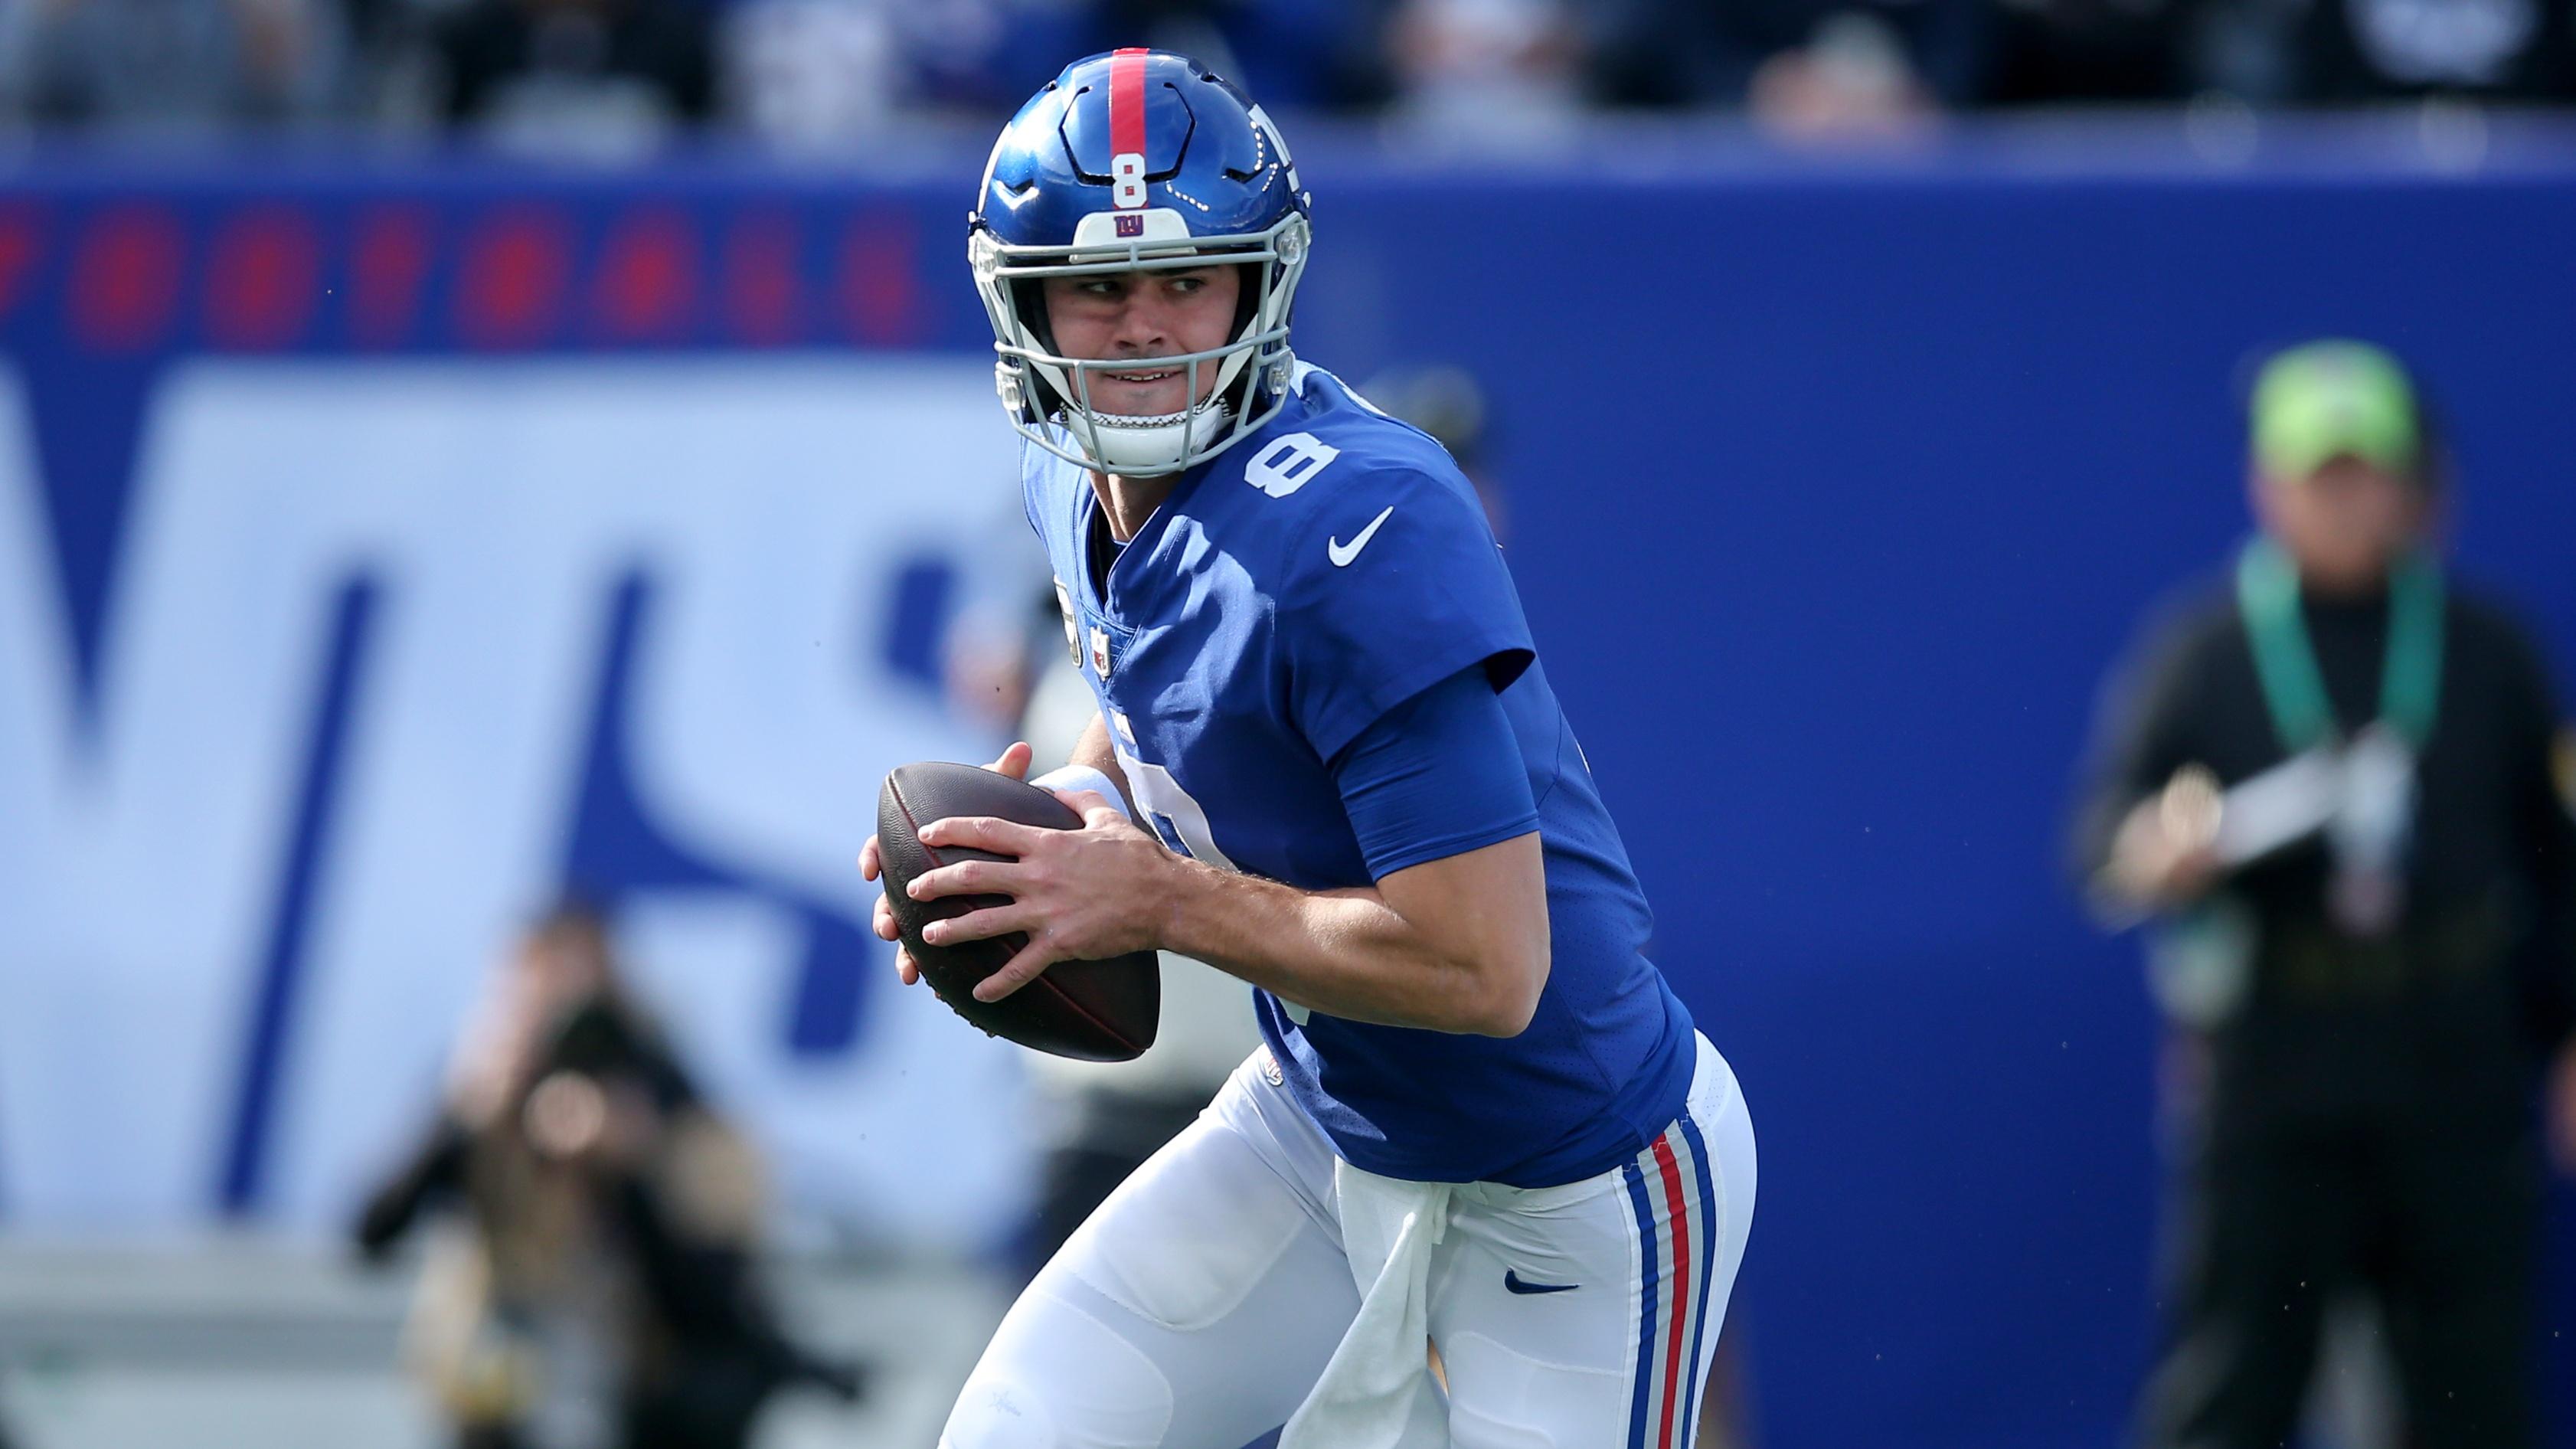 Nov 7, 2021; East Rutherford, New Jersey, USA; New York Giants quarterback Daniel Jones (8) rolls out of the pocket to pass against the Las Vegas Raiders during the first quarter at MetLife Stadium. Mandatory Credit: Brad Penner-USA TODAY Sports / © Brad Penner-USA TODAY Sports